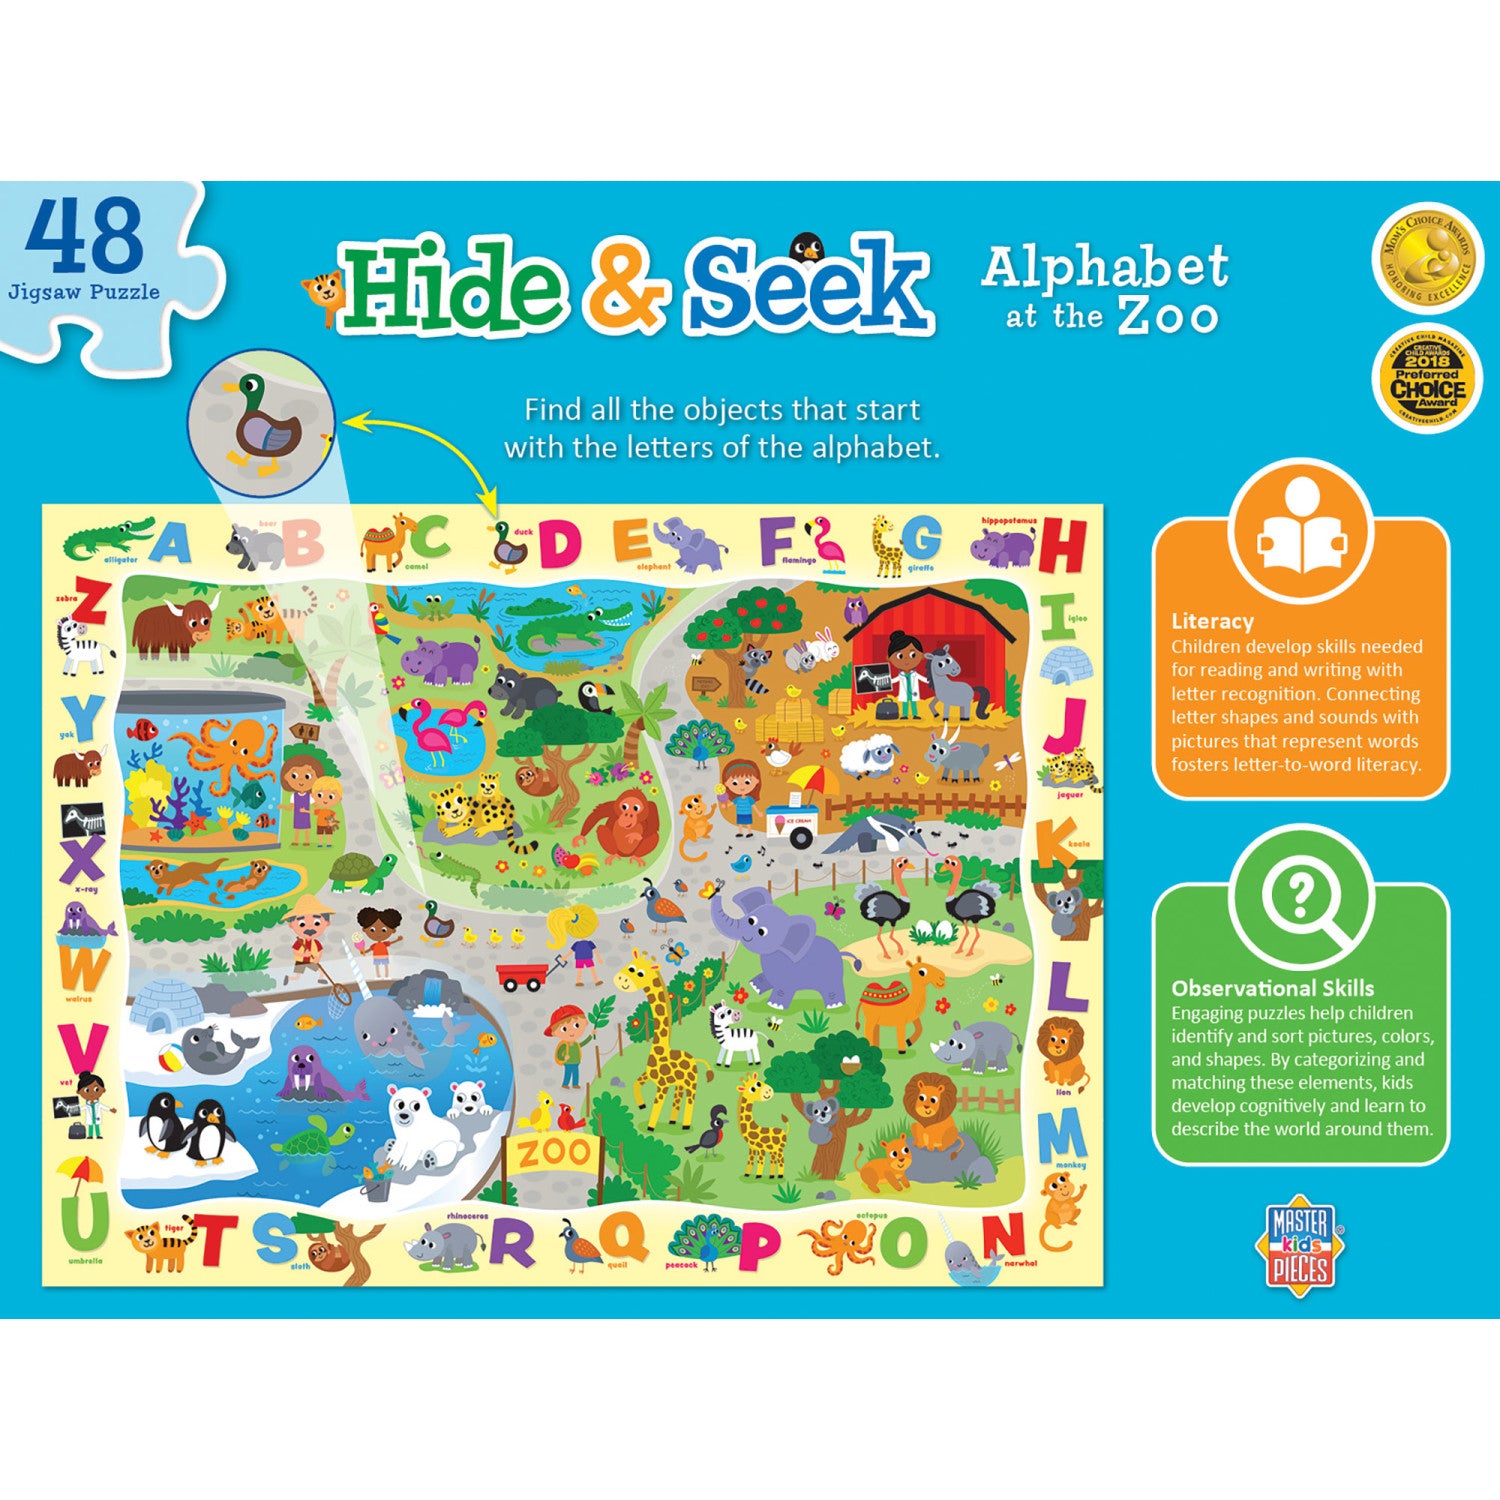 Hide & Seek - Alphabet at the Zoo 48 Piece Jigsaw Puzzle